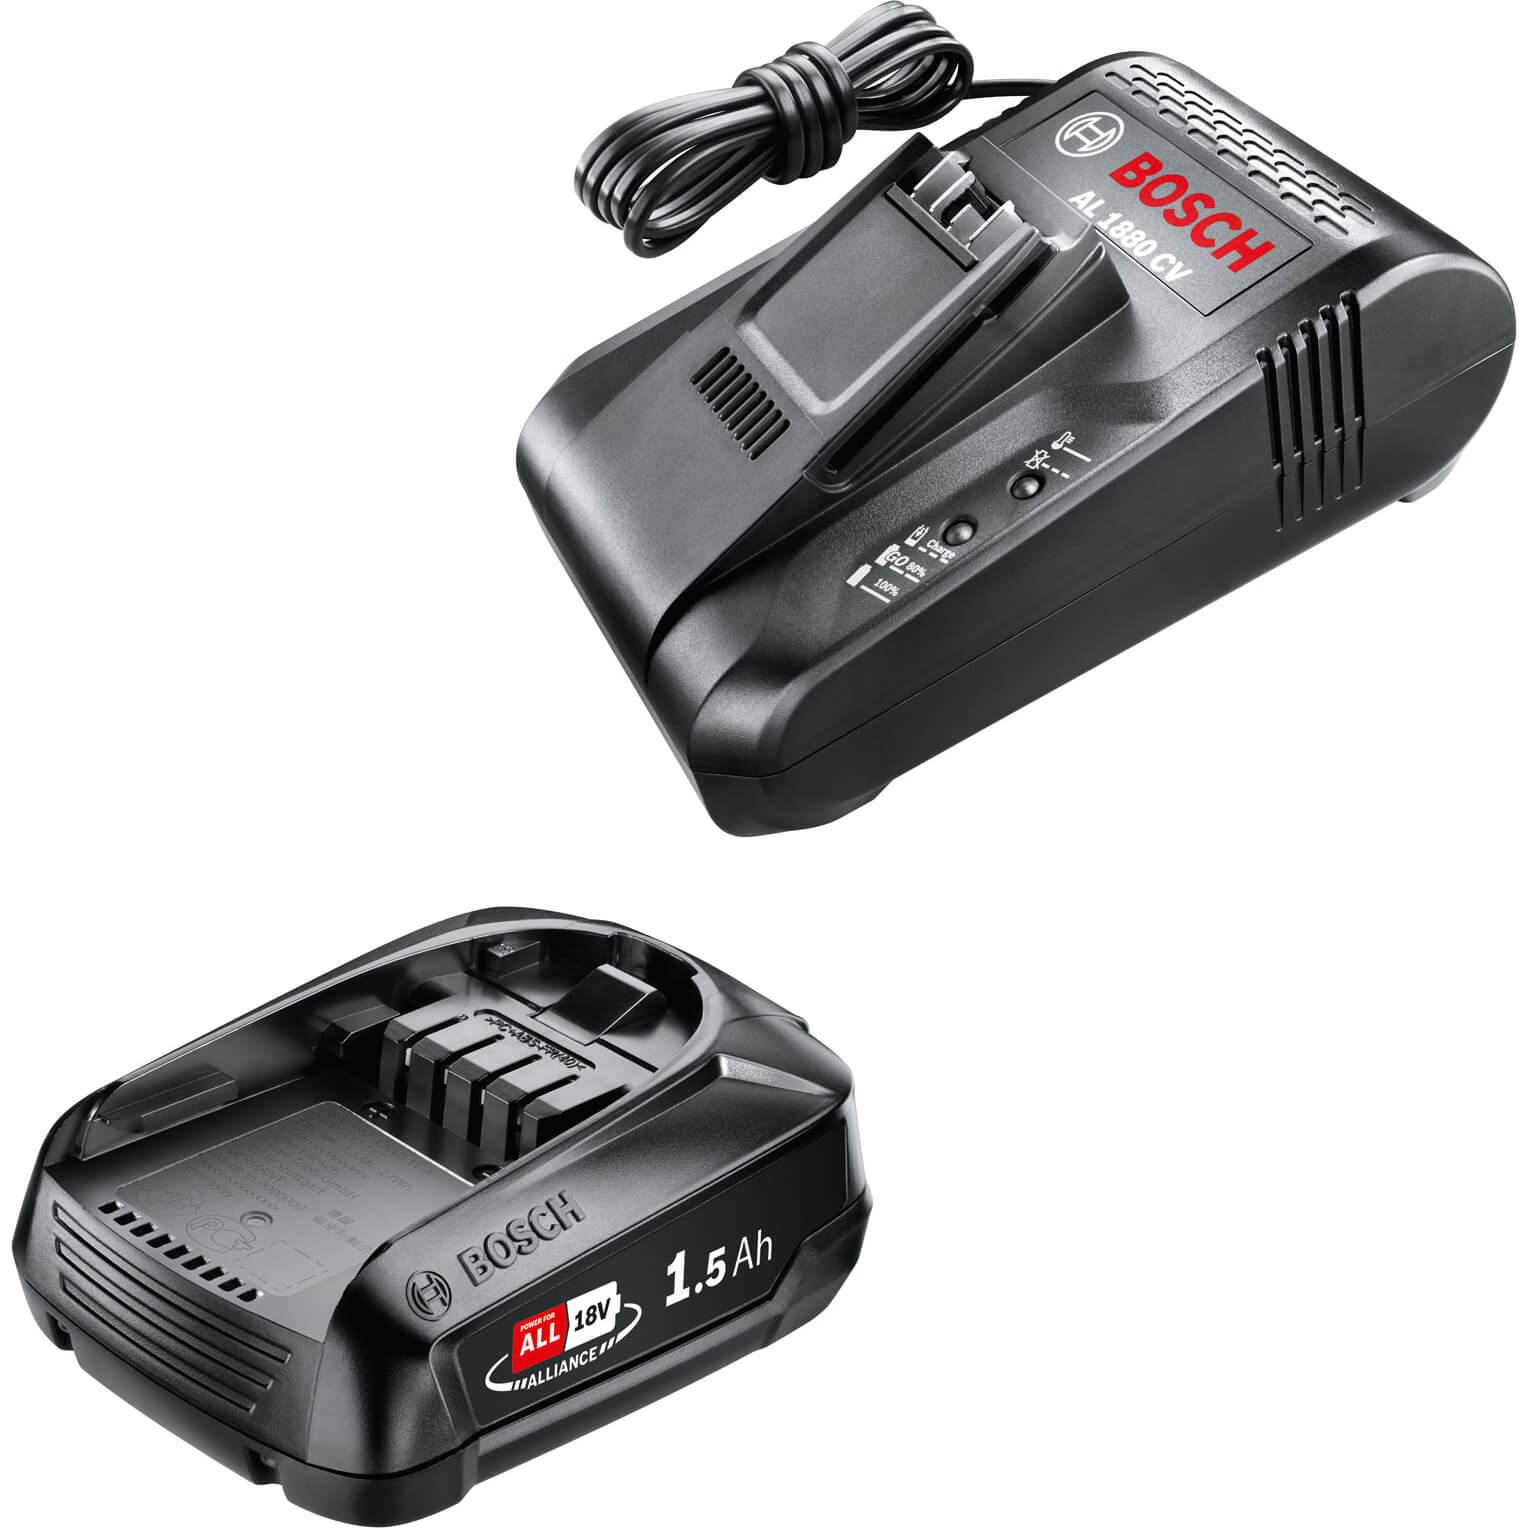 Photo of Bosch Genuine Power4all 18v Cordless Li-ion Battery 1.5ah And 8a Super Fast Charger Set 1.5ah